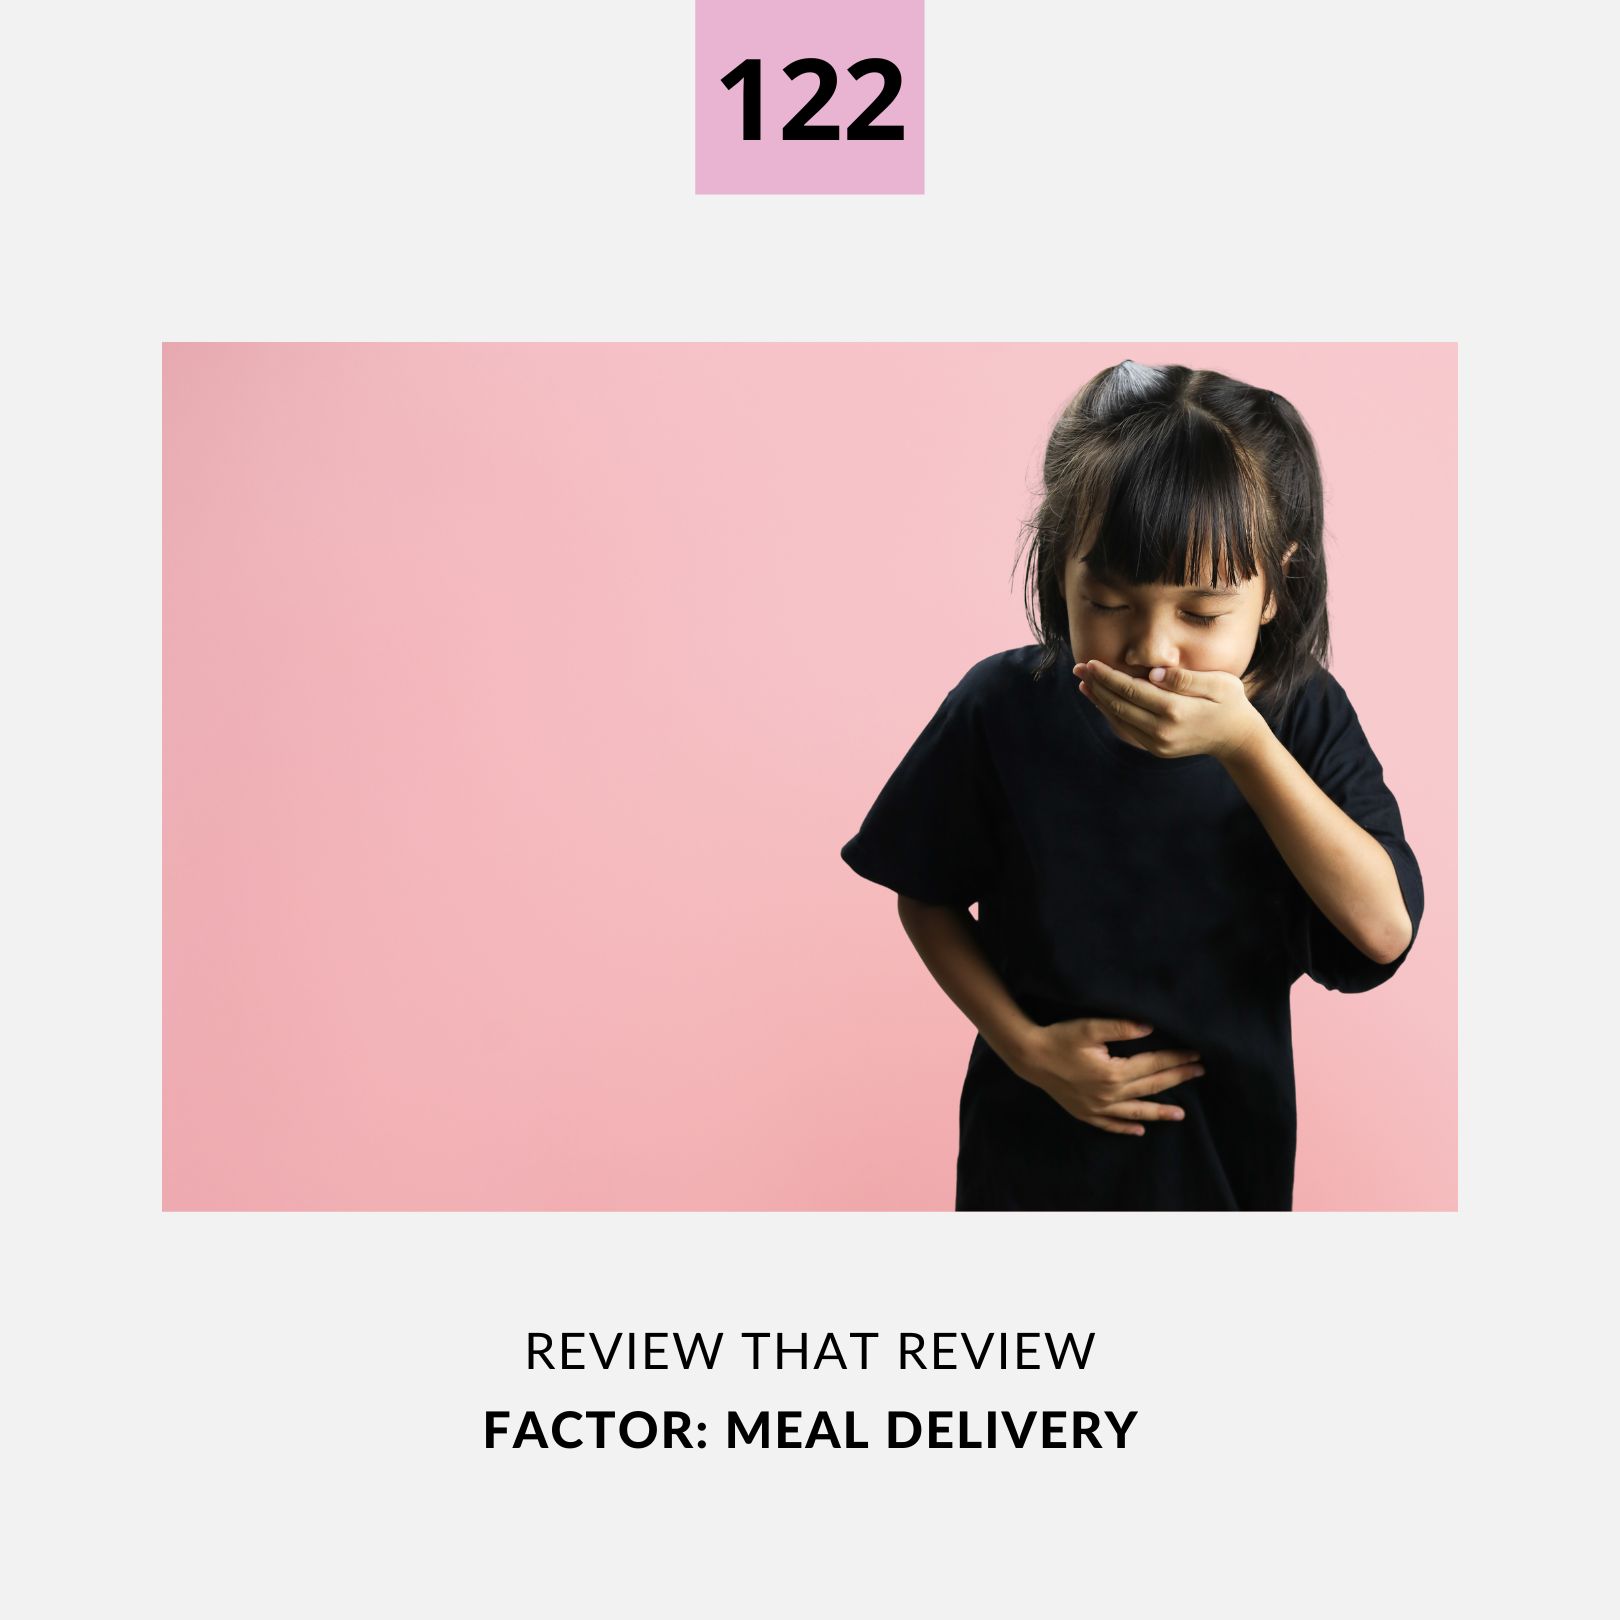 122: Factor Meal Delivery - 1 Star Review